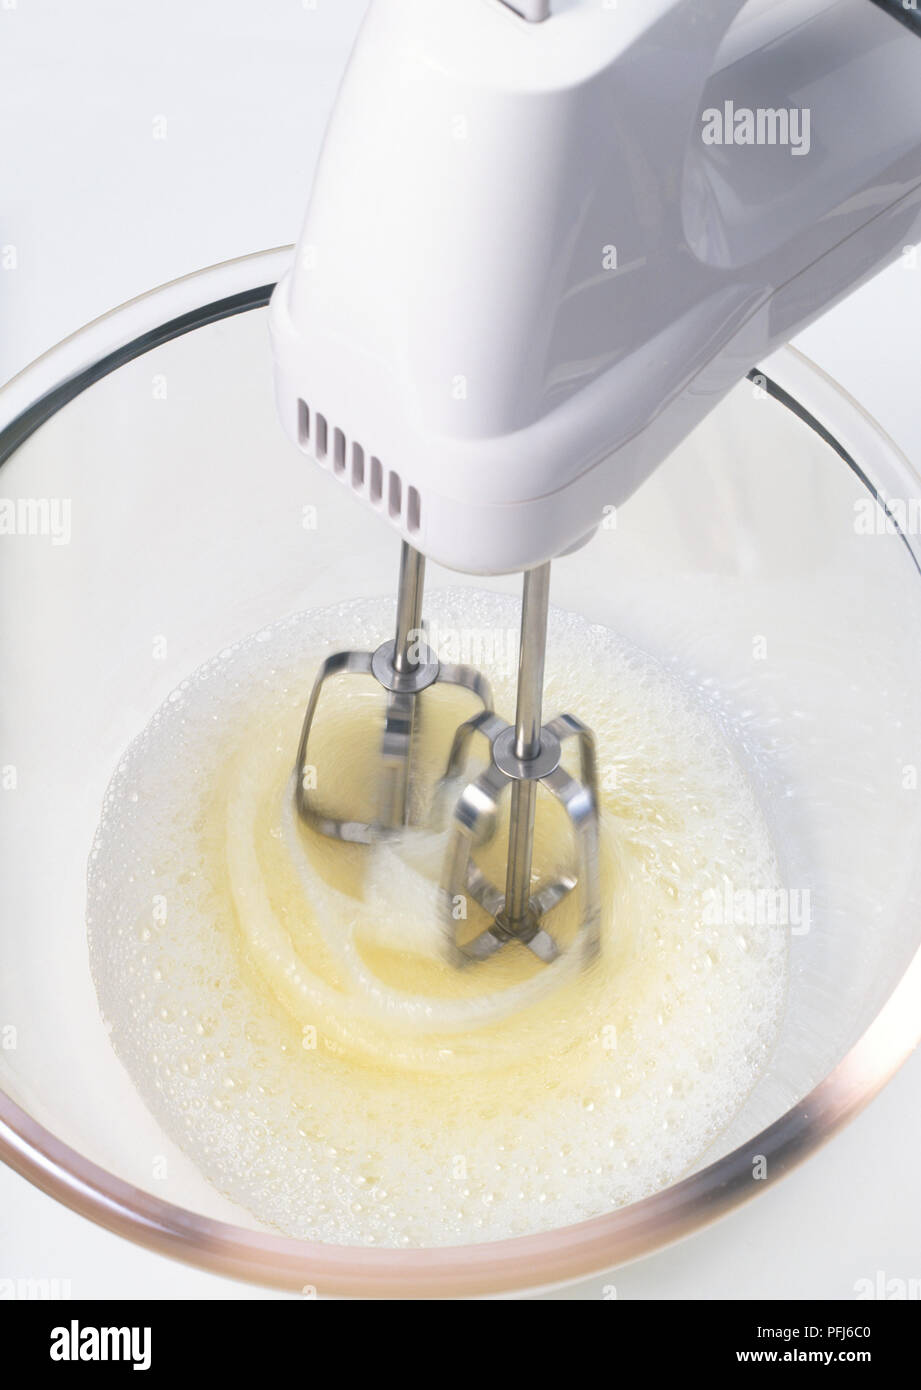 Electric mixer whisking egg whites in a glass bowl Stock Photo - Alamy